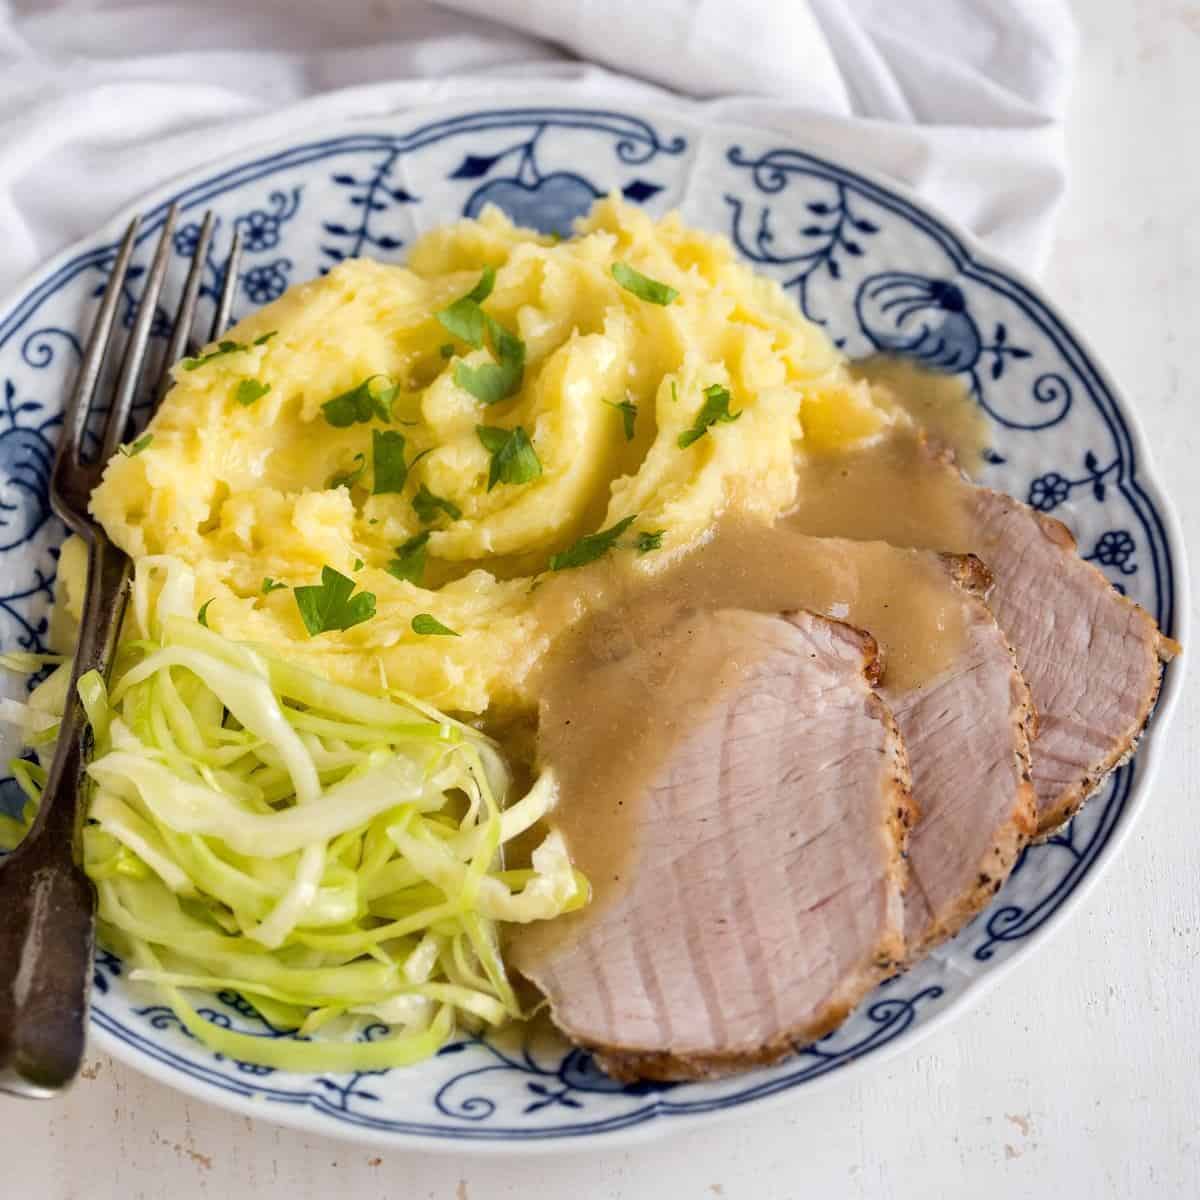 Vinegar coleslaw served as a side dish with pork roast and mashed potatoes.